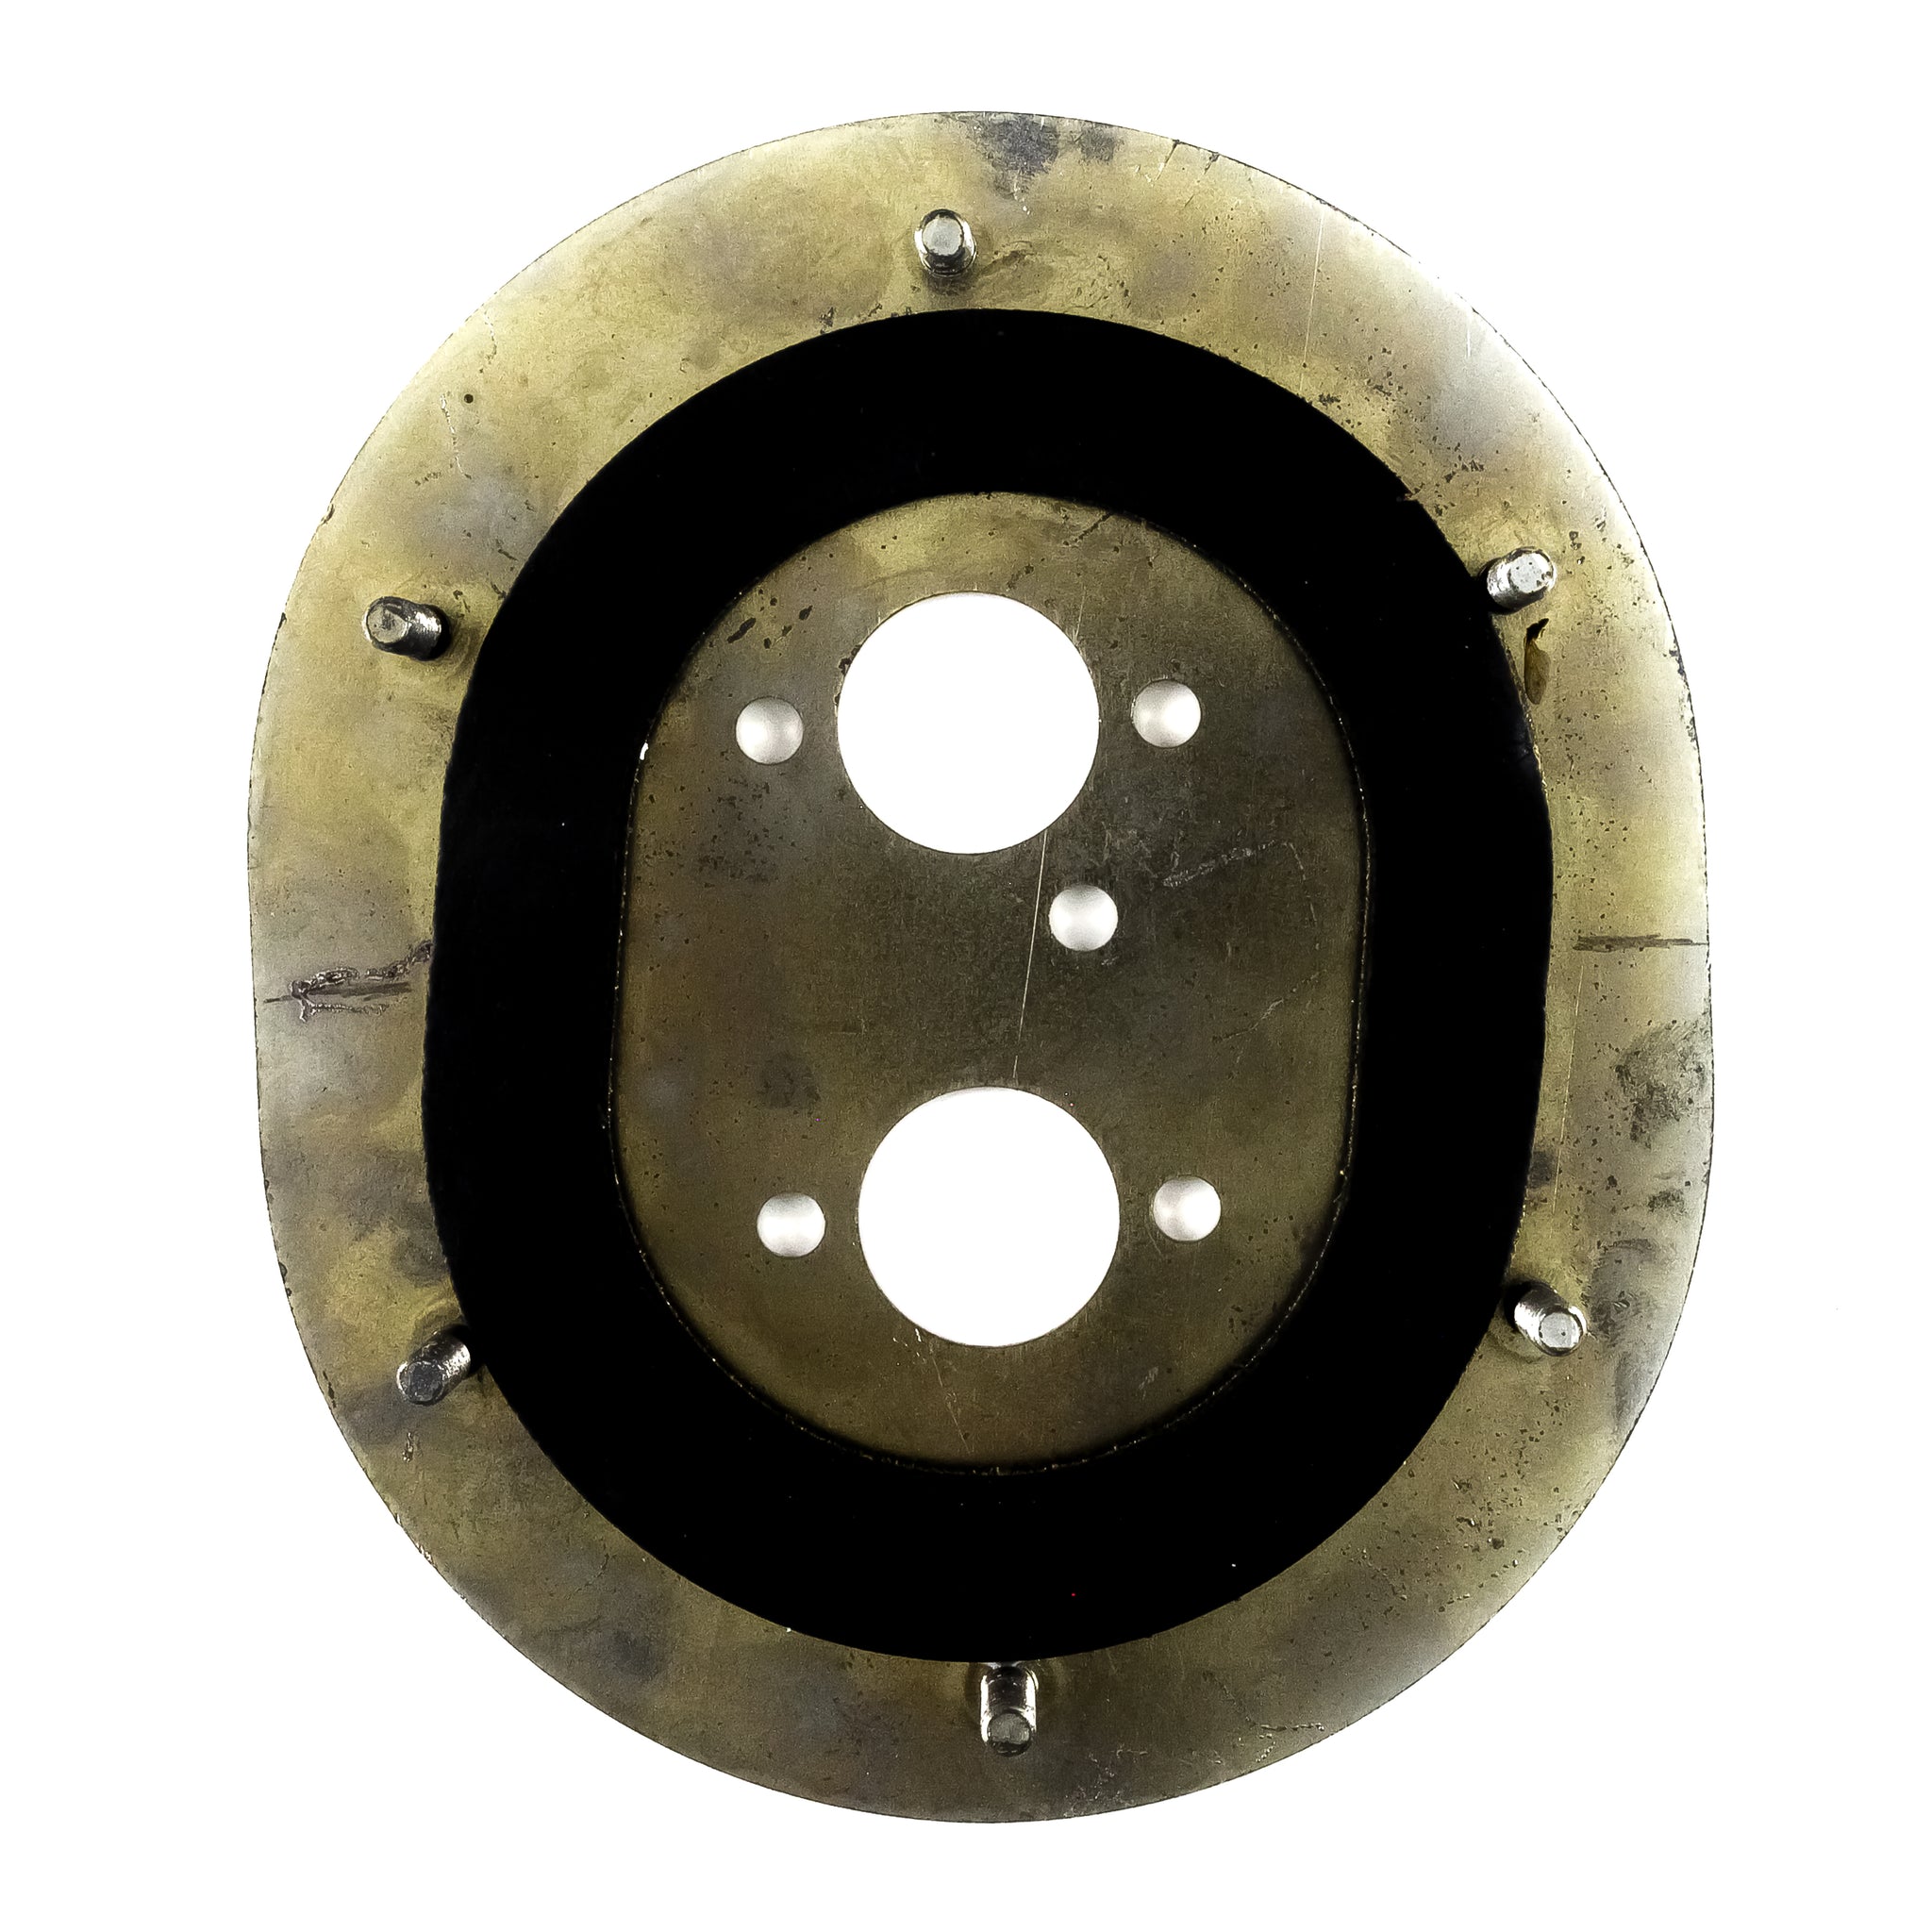 Bottom Plate with Gasket - Rounded